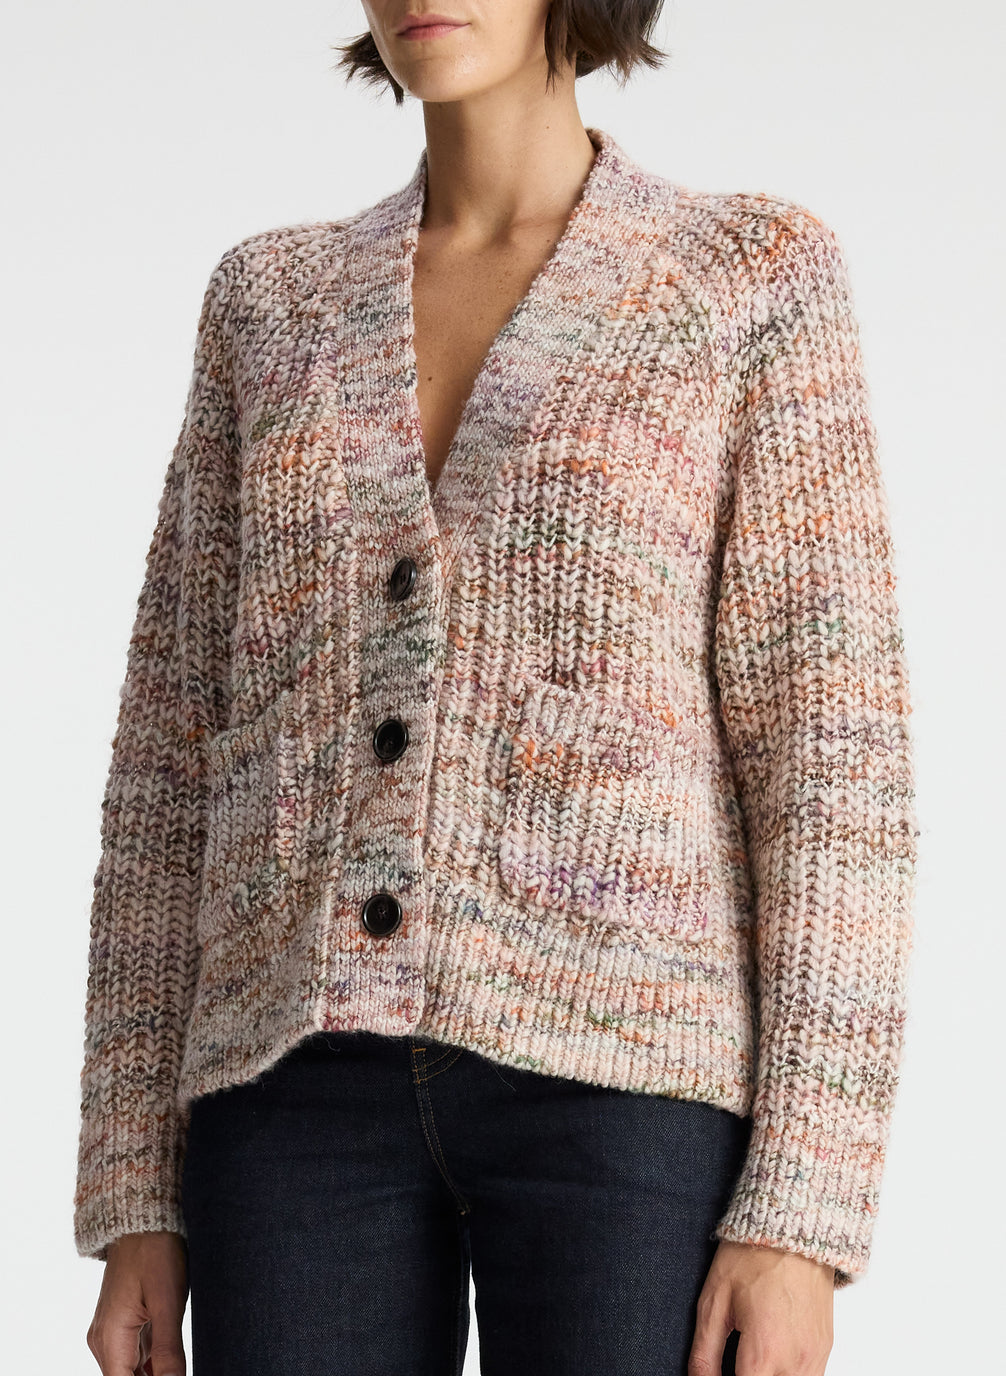 detail view of woman wearing multicolor cream, brown, purple, and green long sleeve knit cardigan with v neck, 3 front buttons, and two front pockets